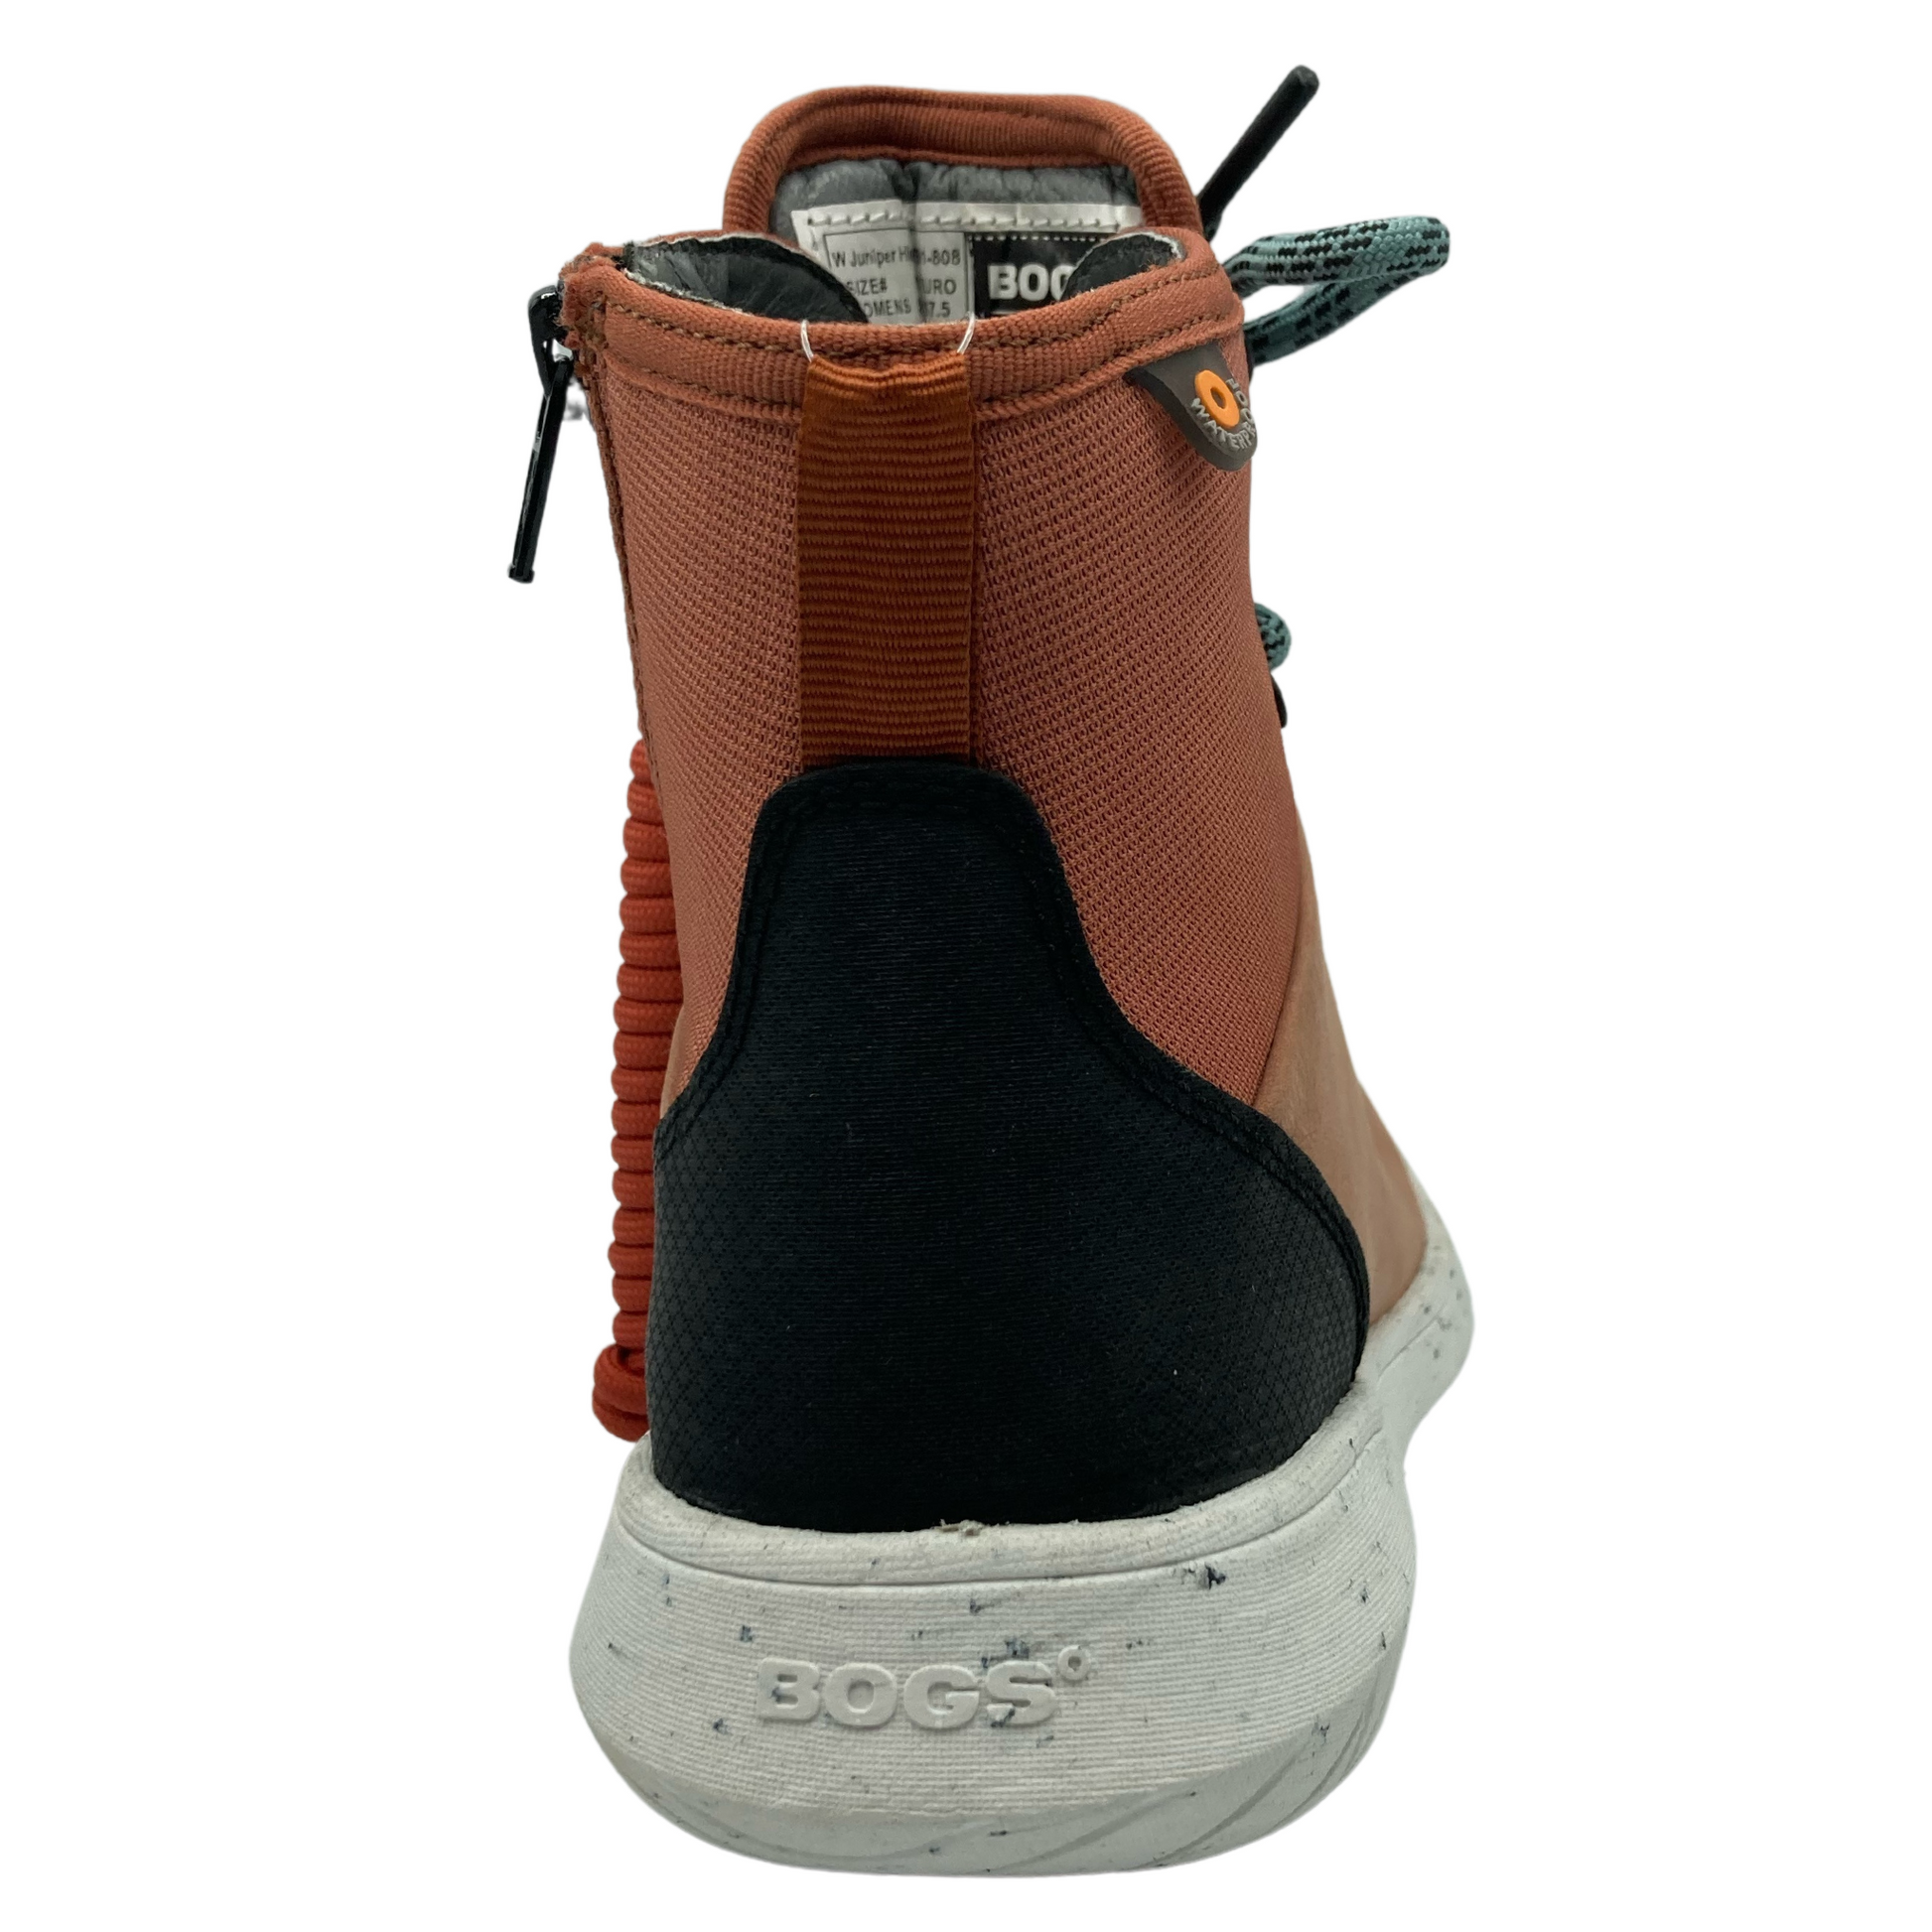 Back view of waterproof ankle boot with white outsole